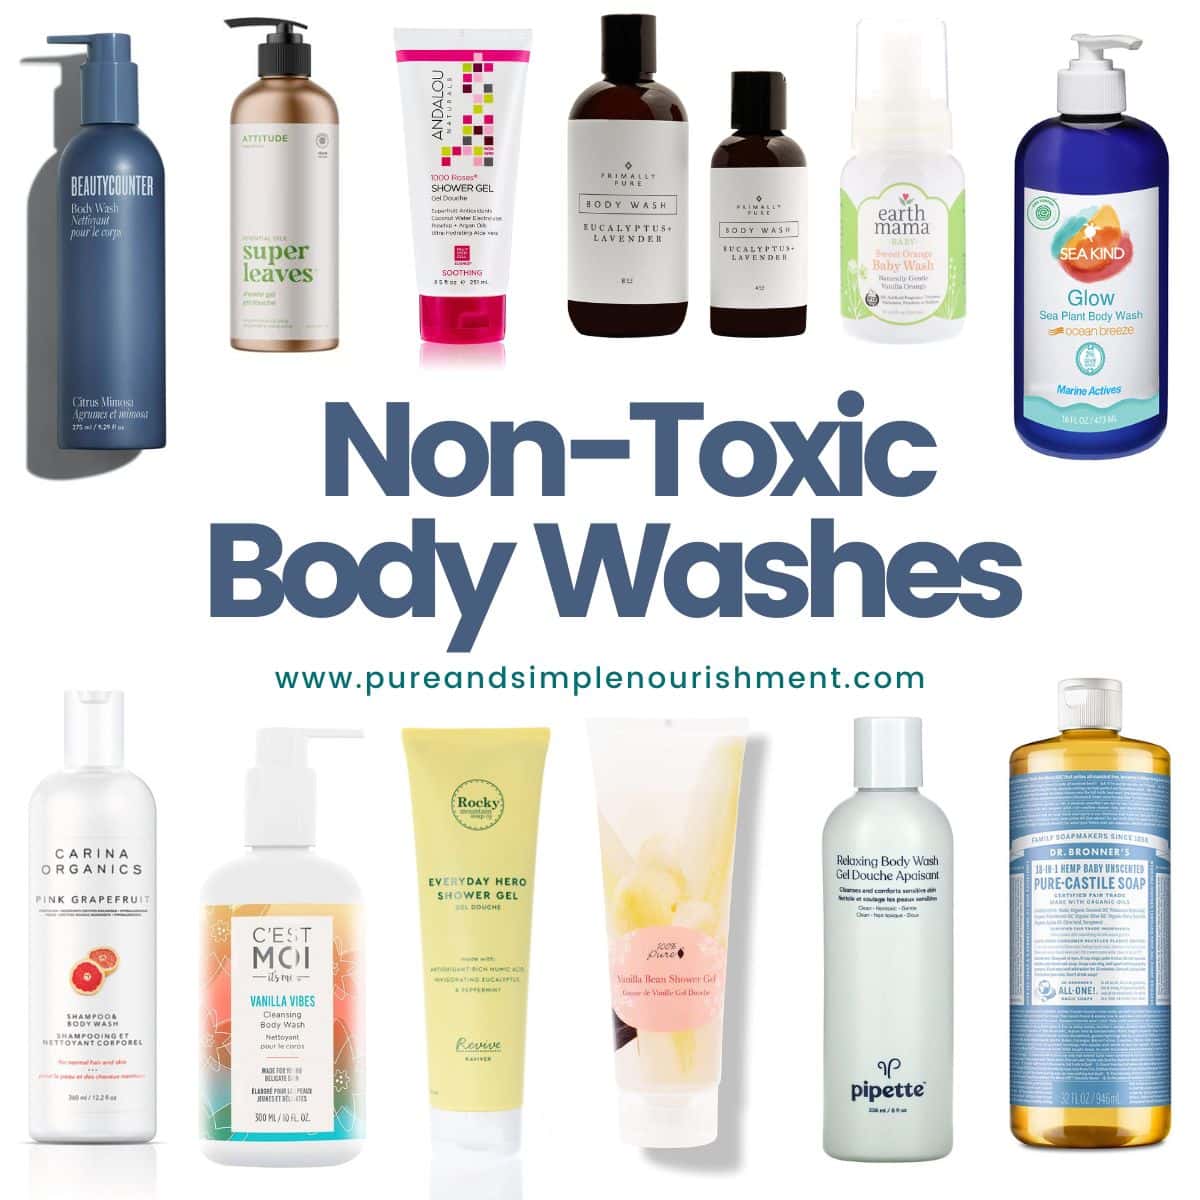 Create Your Own At-Home Non-Toxic Body Wash - Breast Cancer